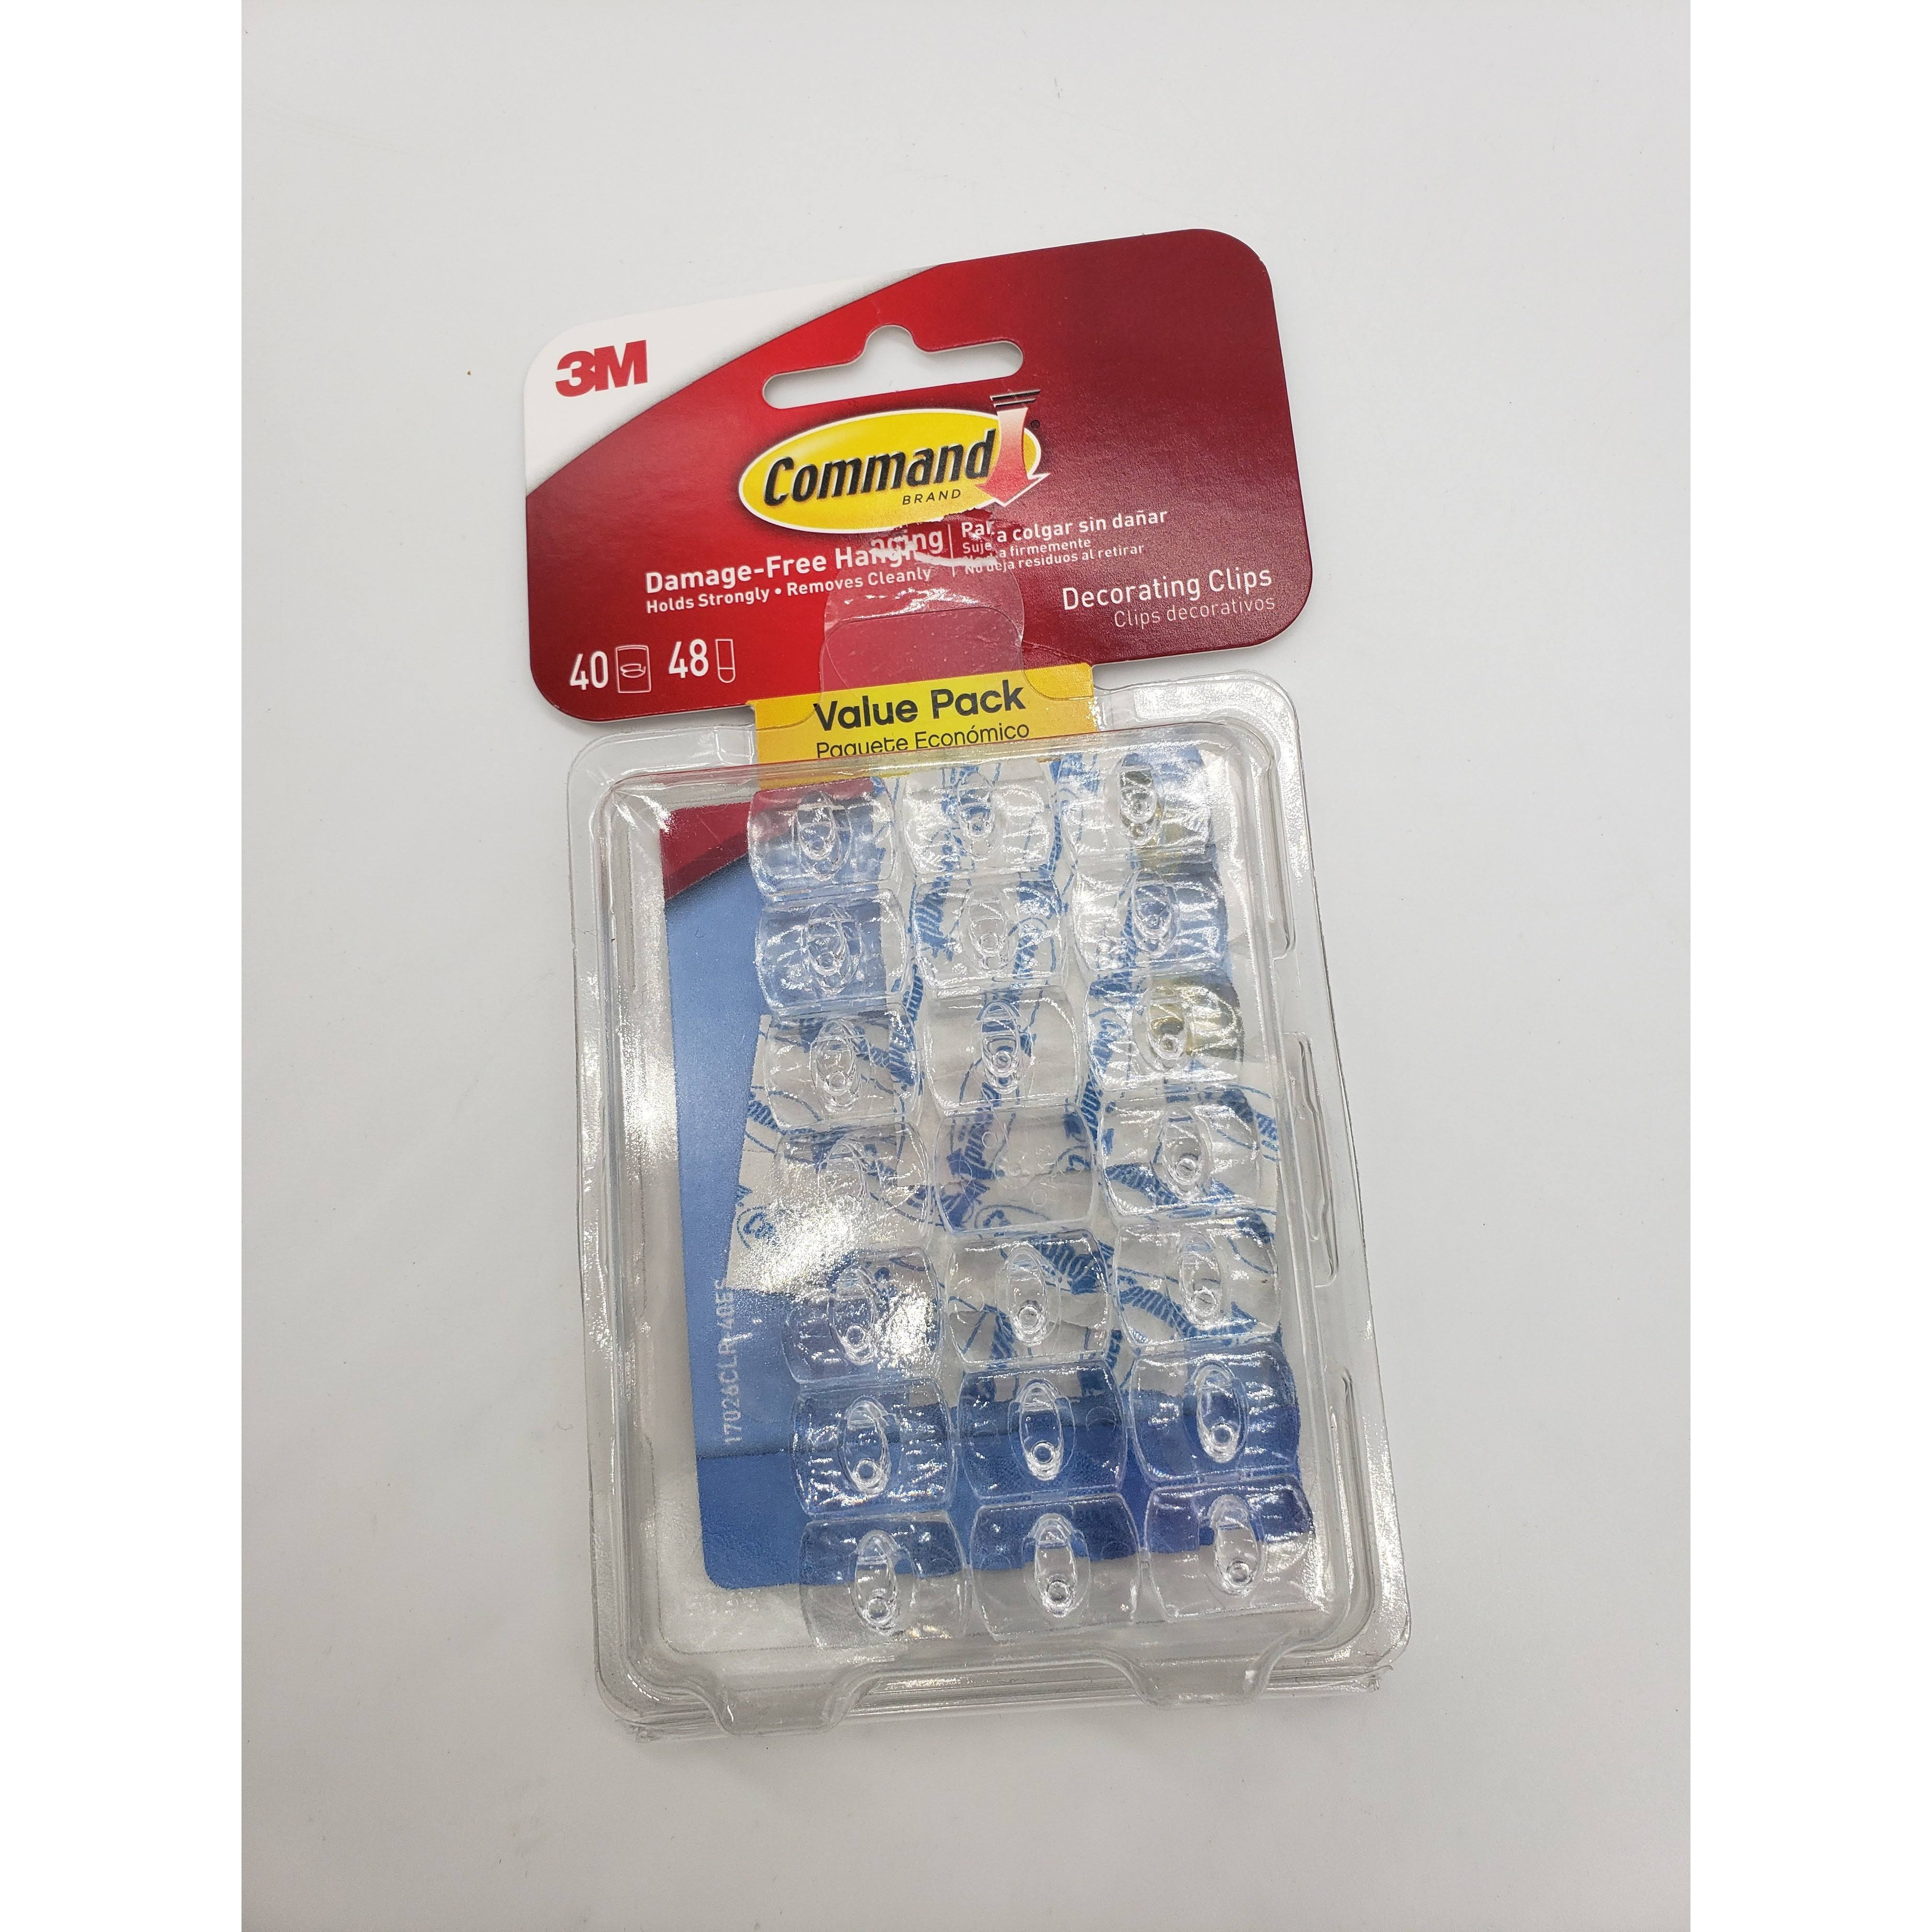 3M Command Decorating Clips Value Pack - Clear, 40ct